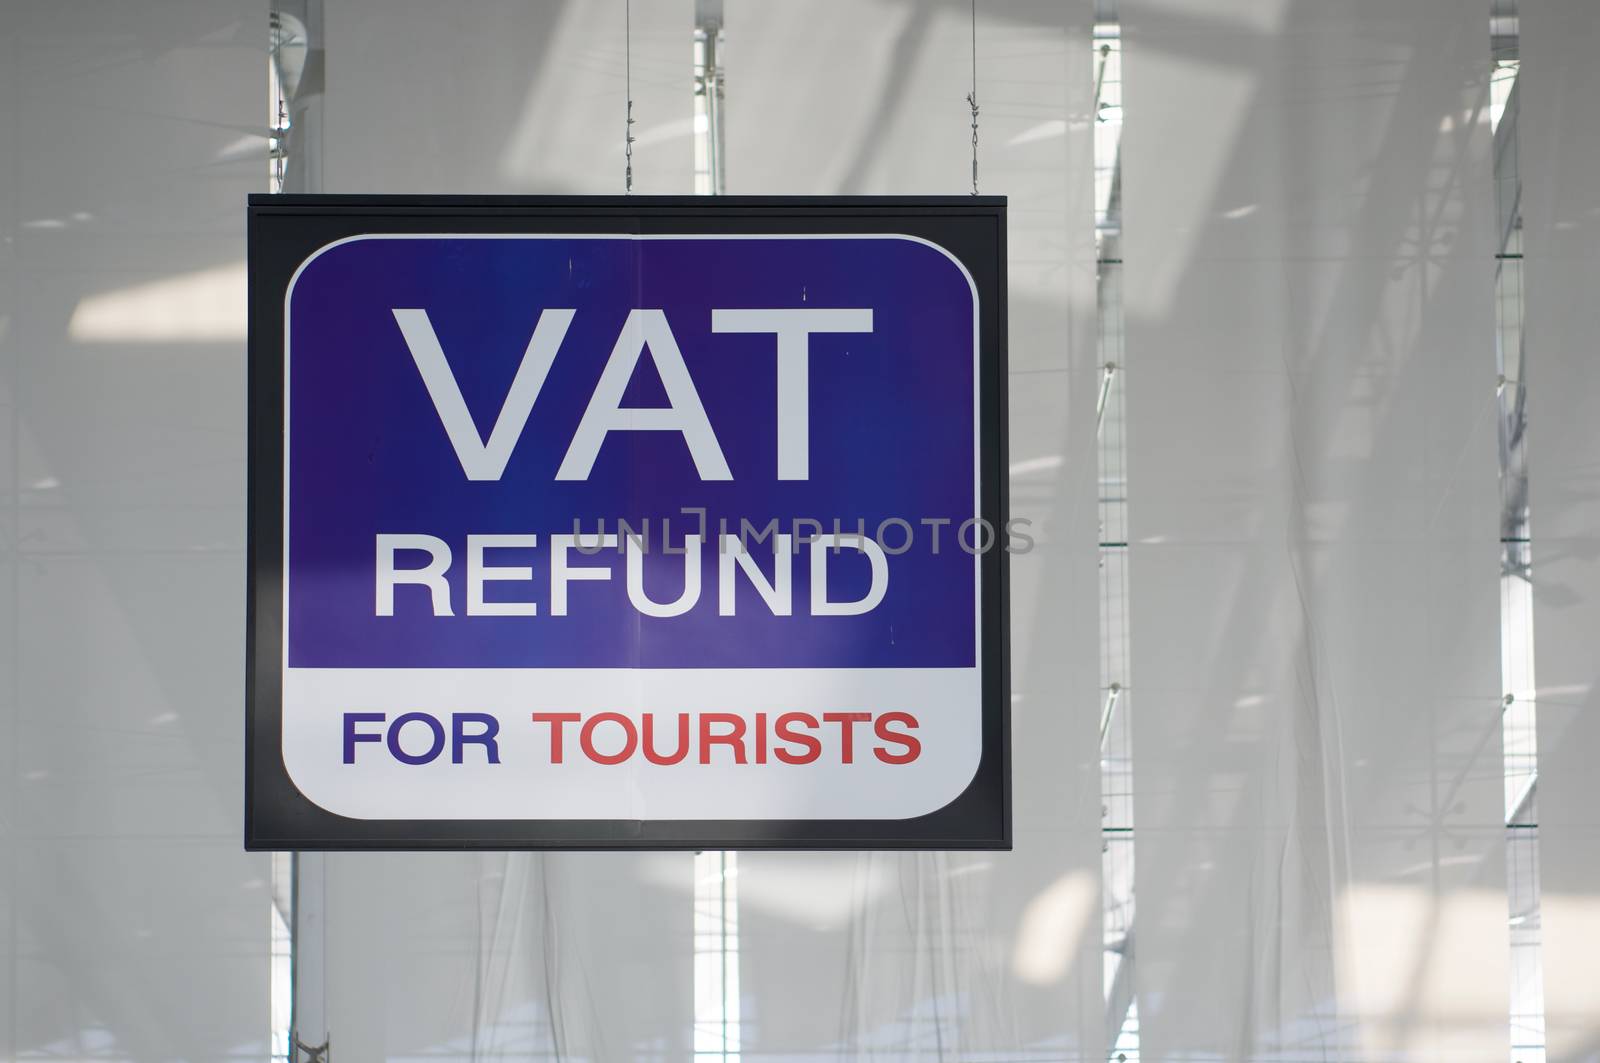 Vat refund for tourists information board sign with red and white character on blue background at international airport terminal.